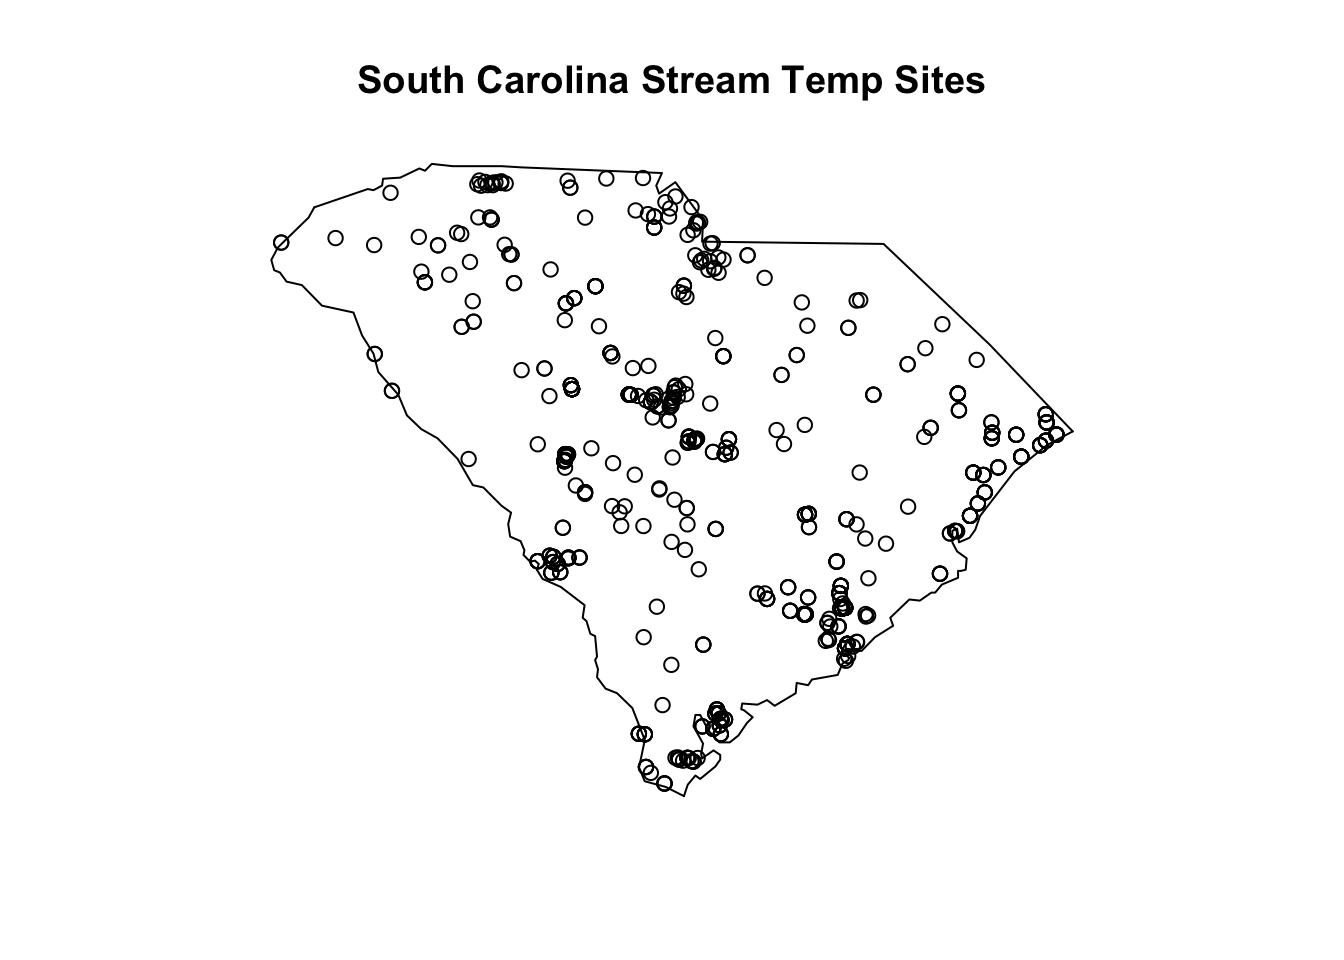 Geographic locations of NWIS South Carolina stream sites with temperature data